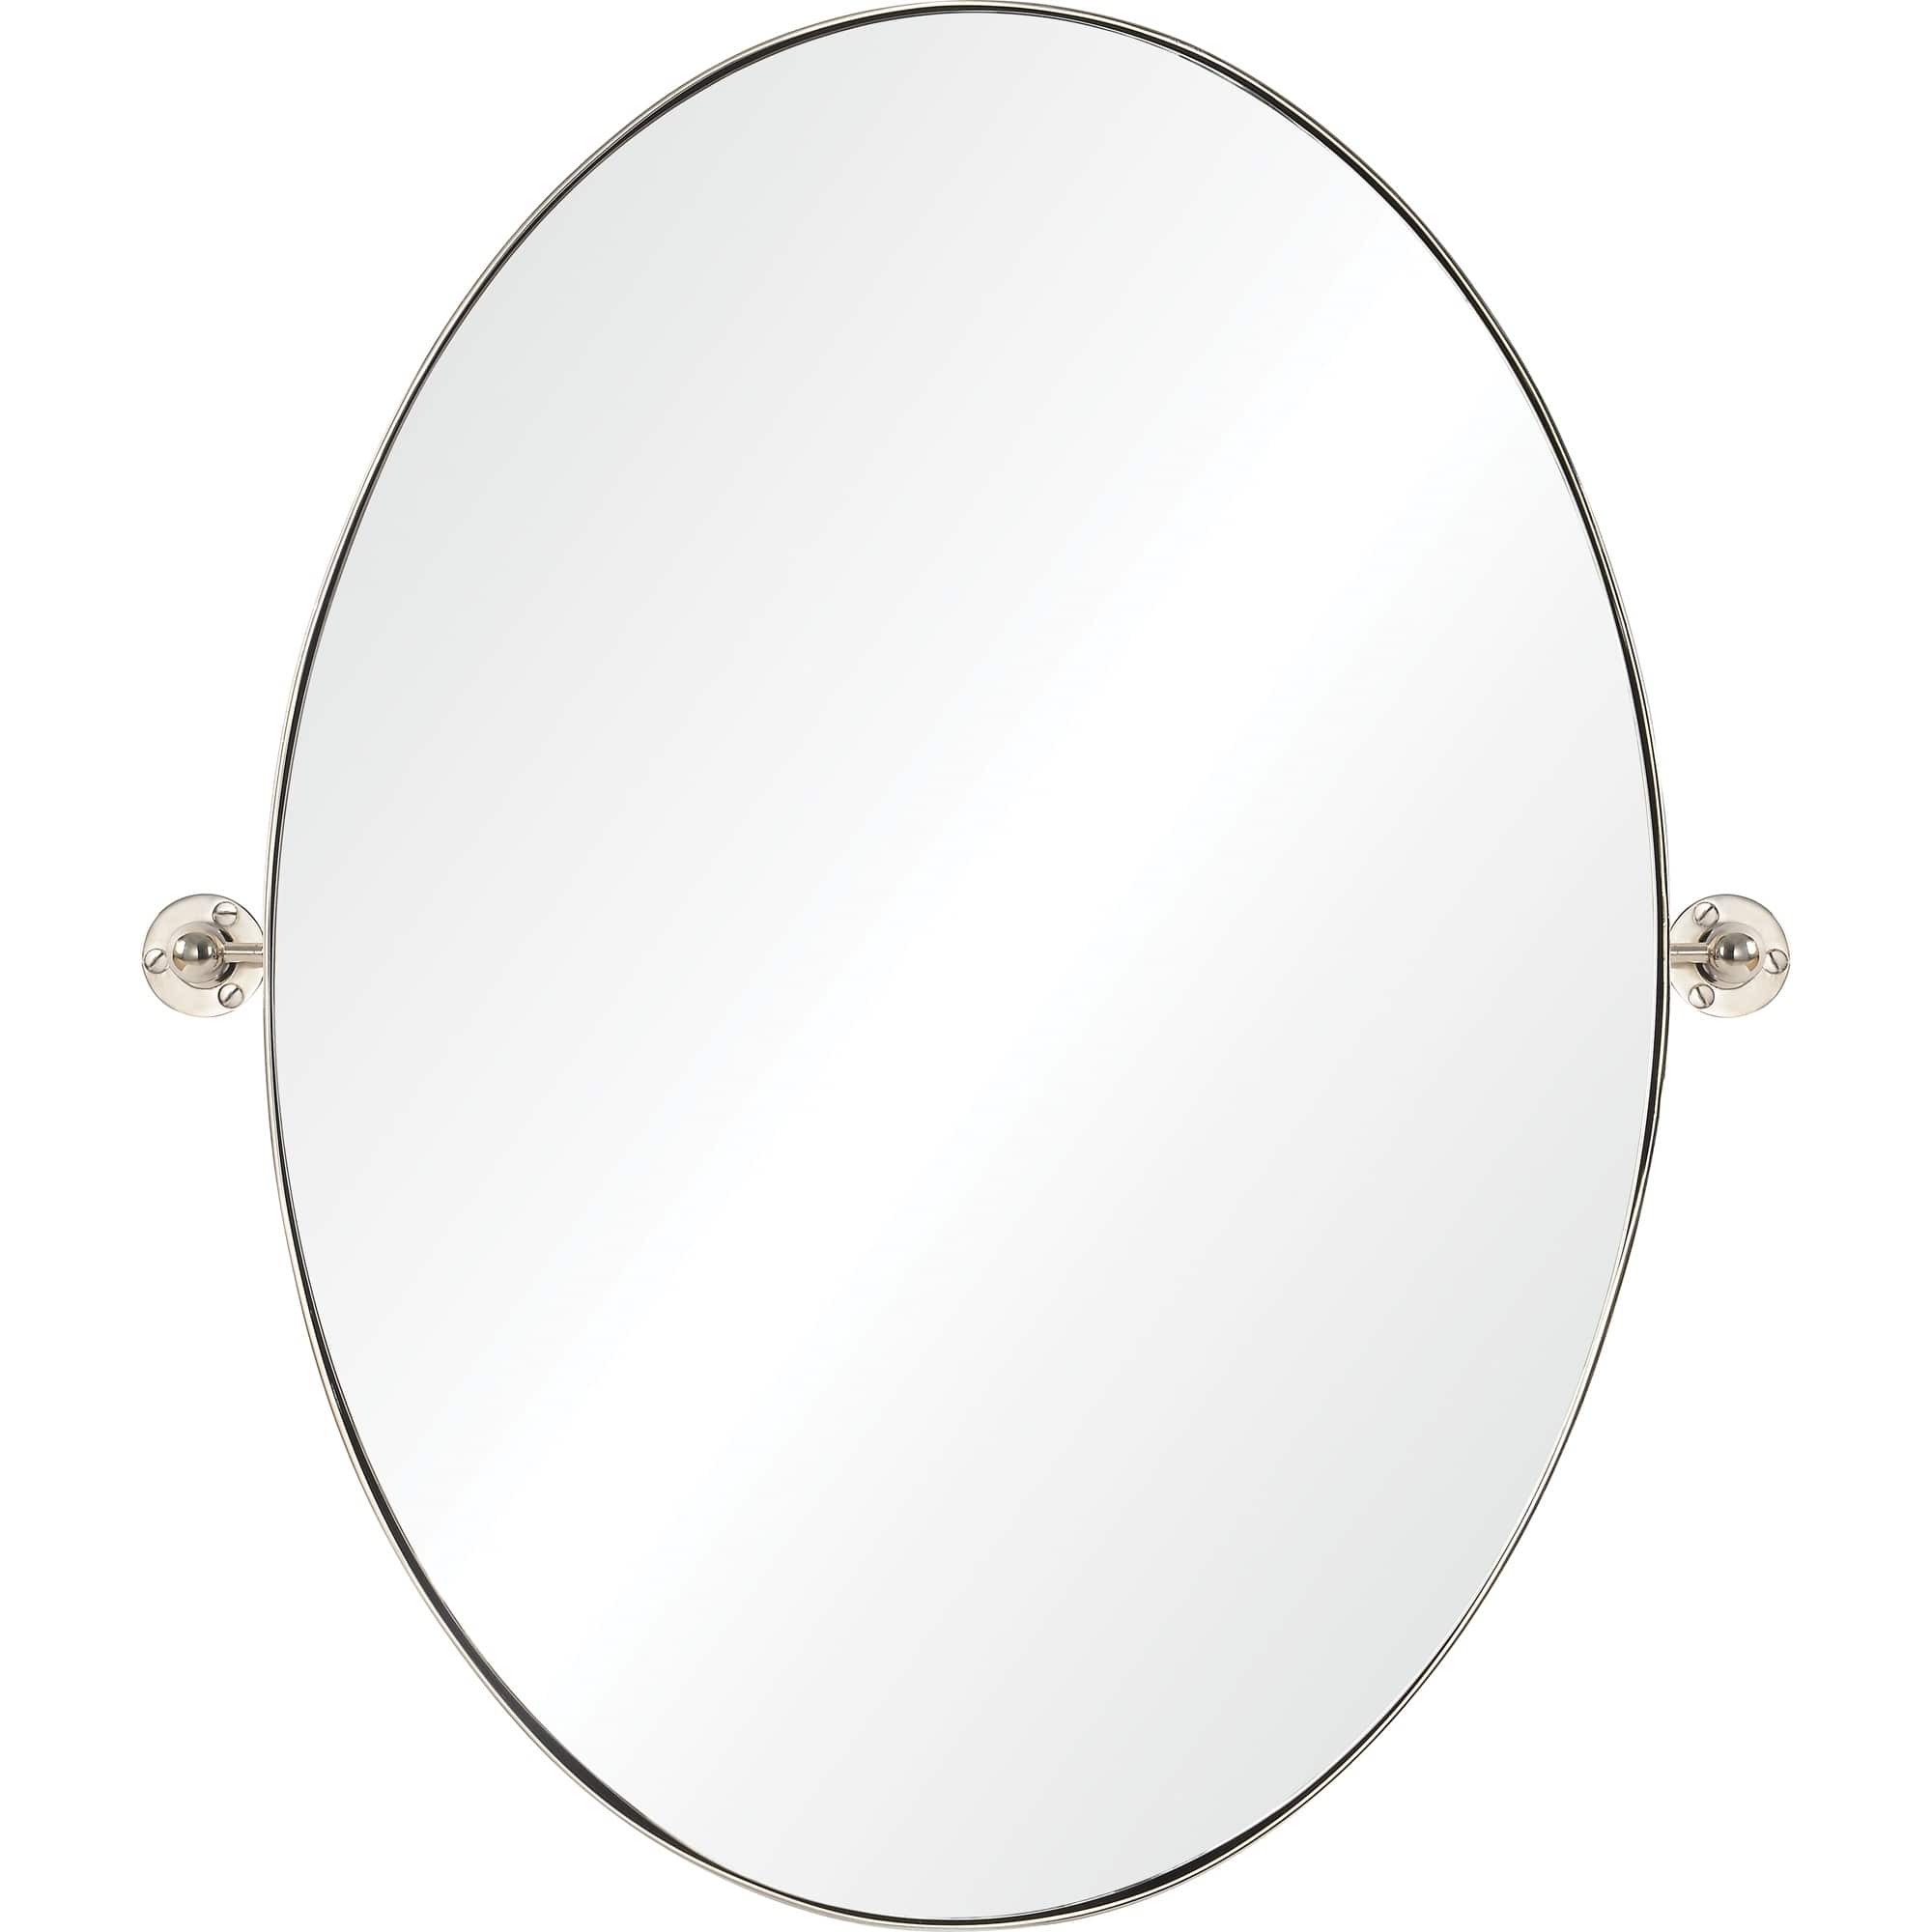 Copper Grove Oval Bathroom Wall Mirror with Polished Nickel Frame - Bed ...